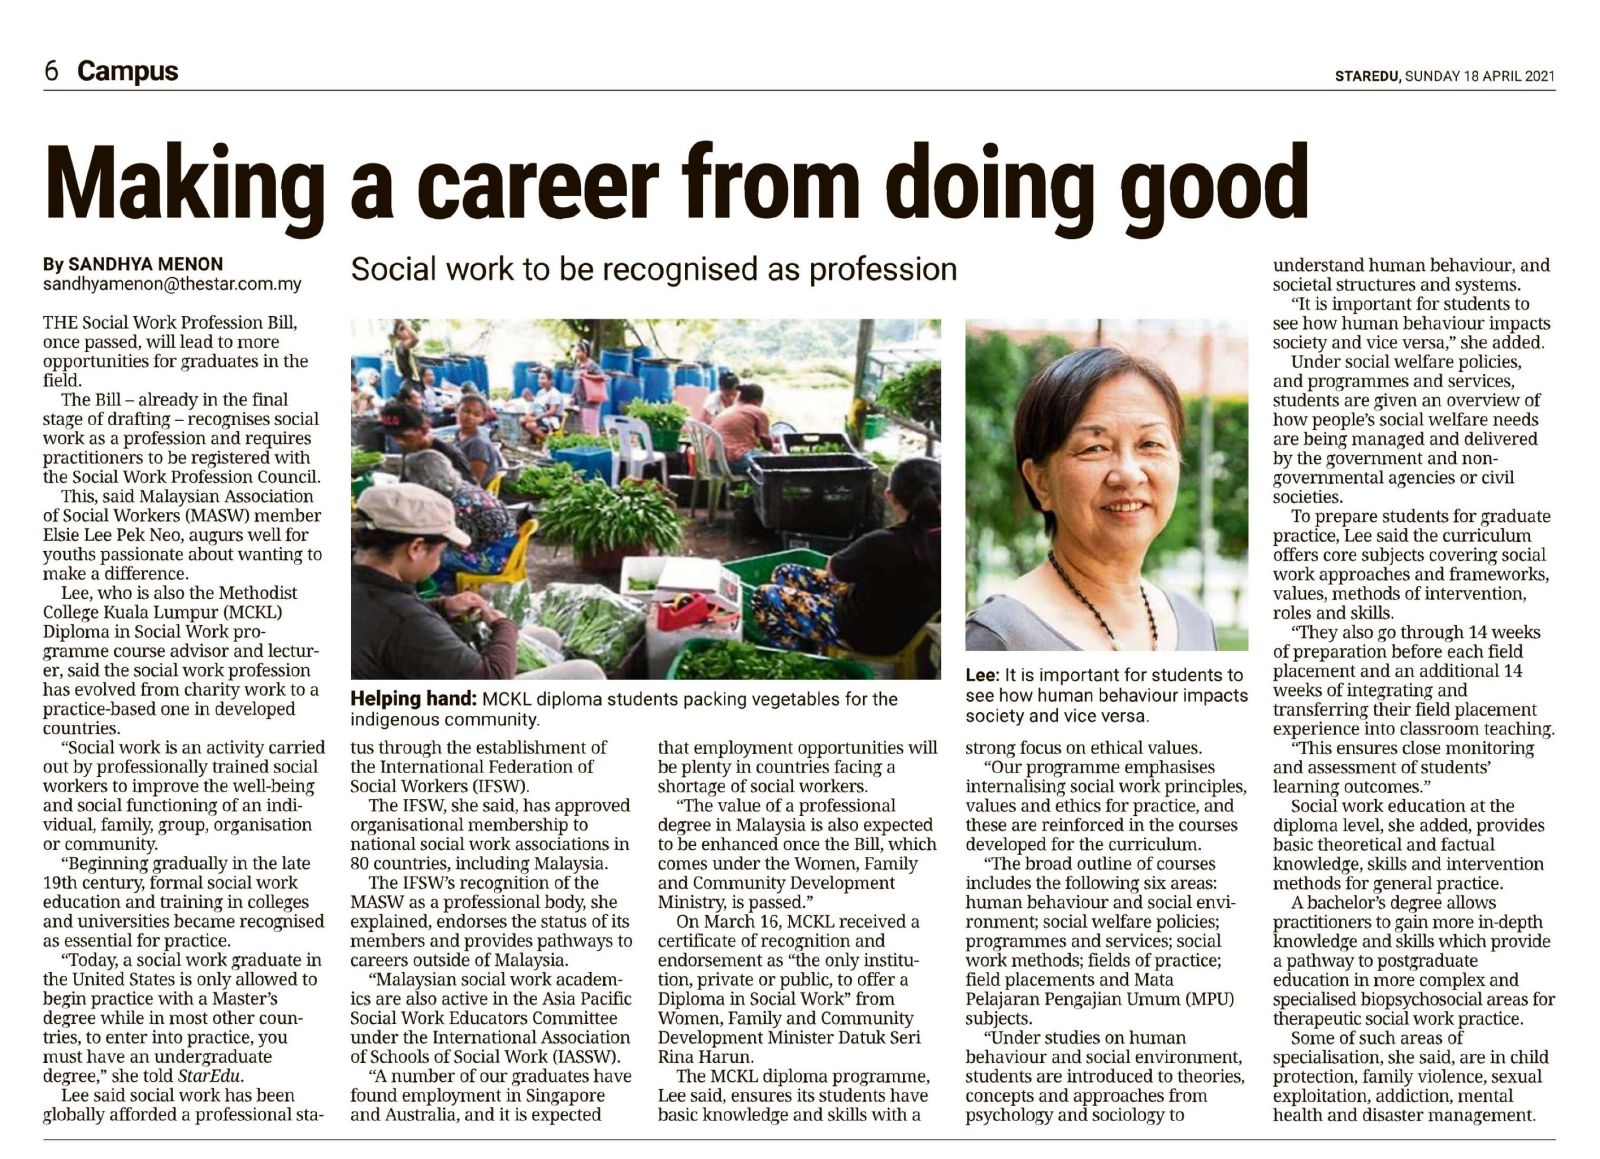 Making a career from doing good